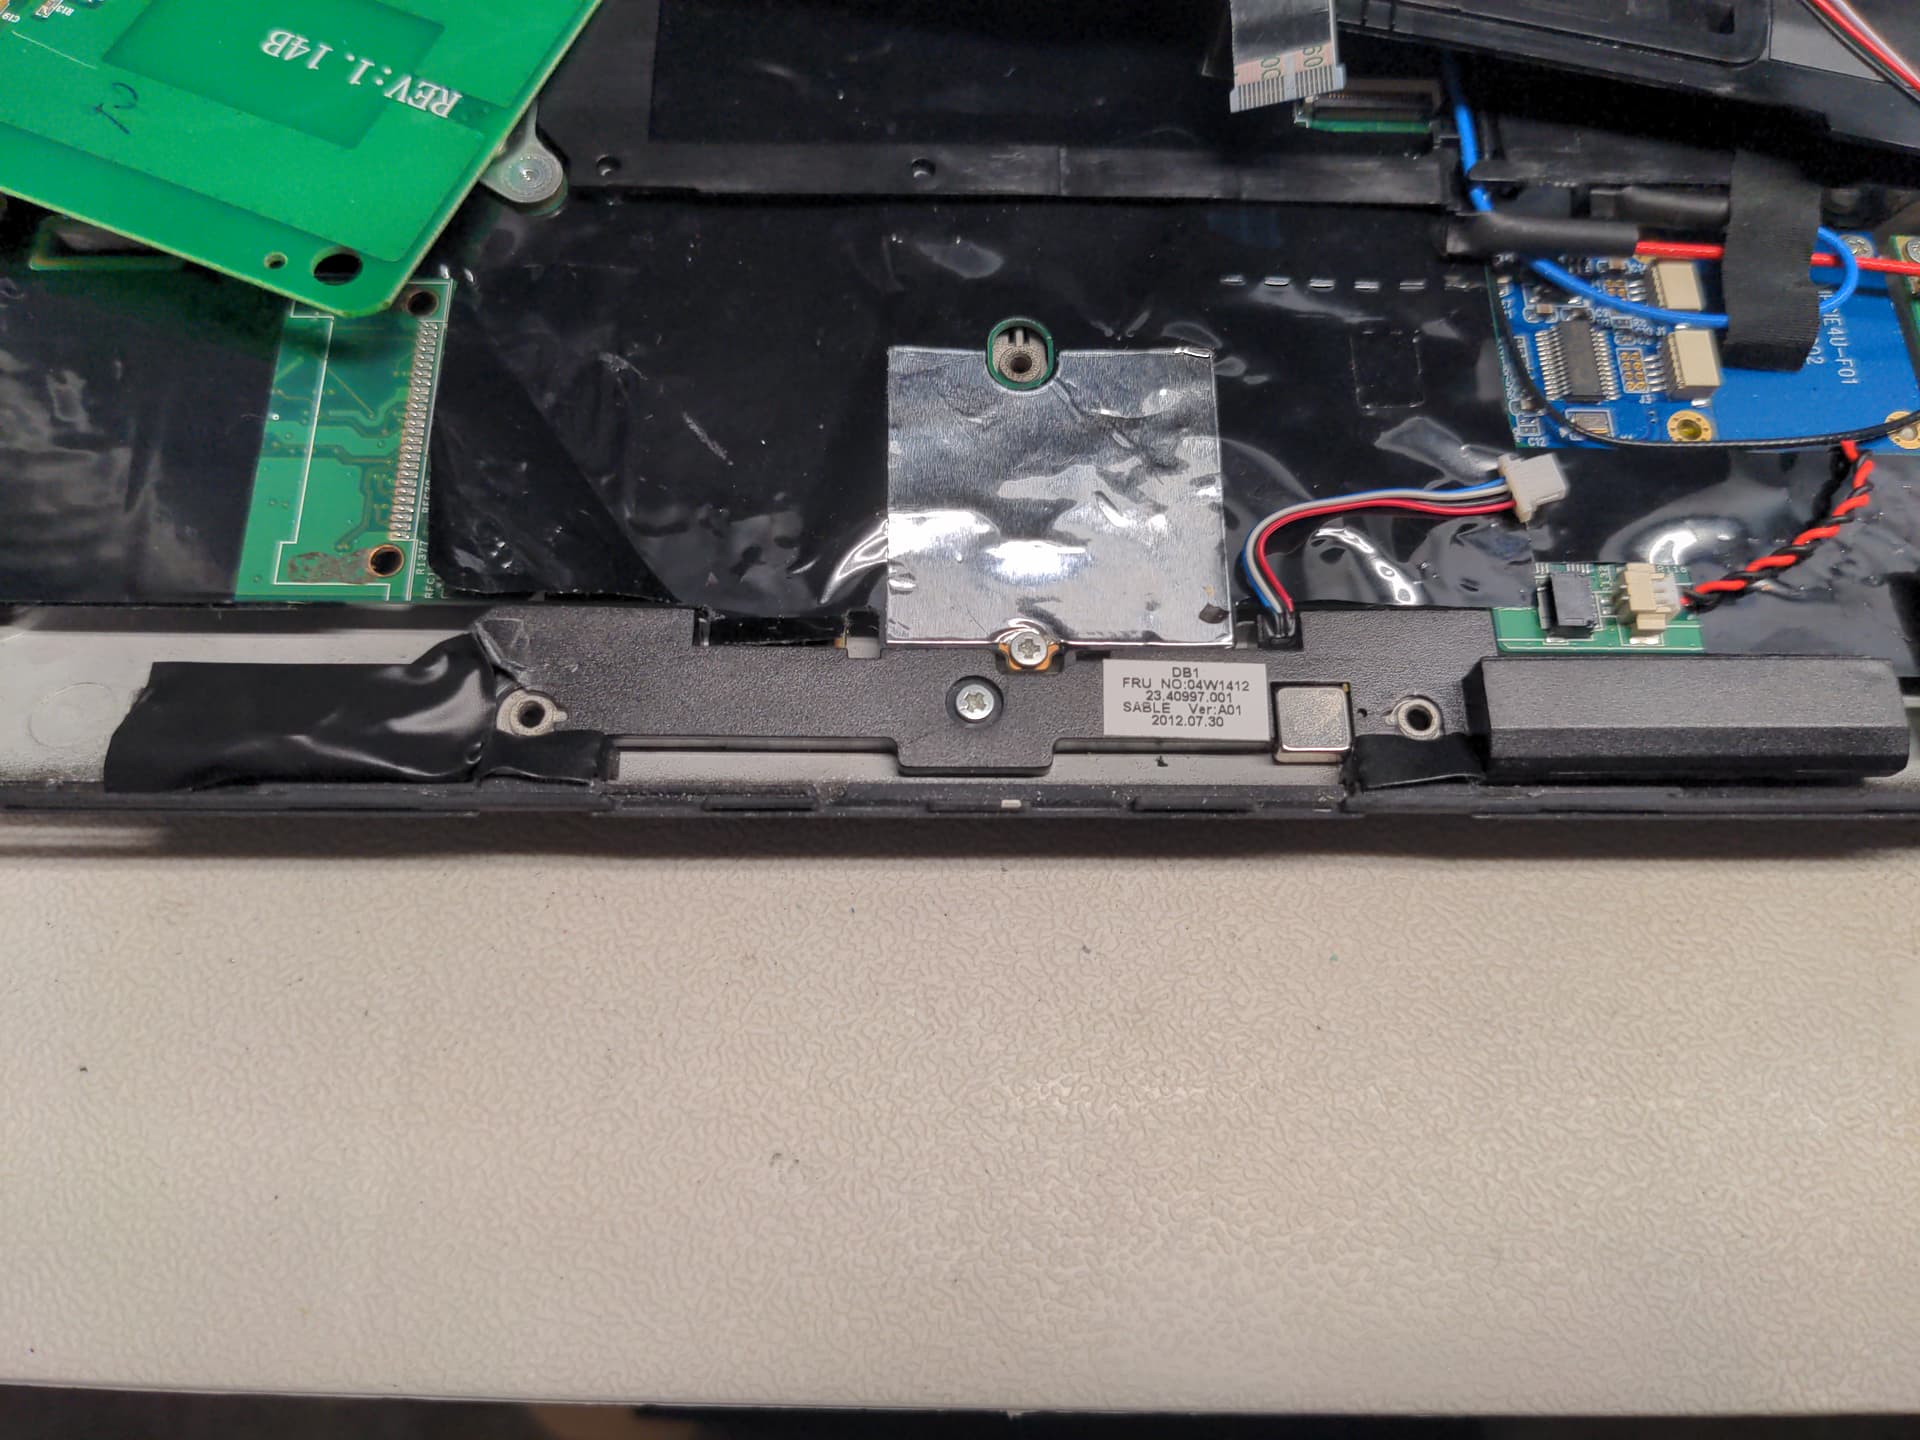 Laptop with speaker assembly missing a piece and taped over